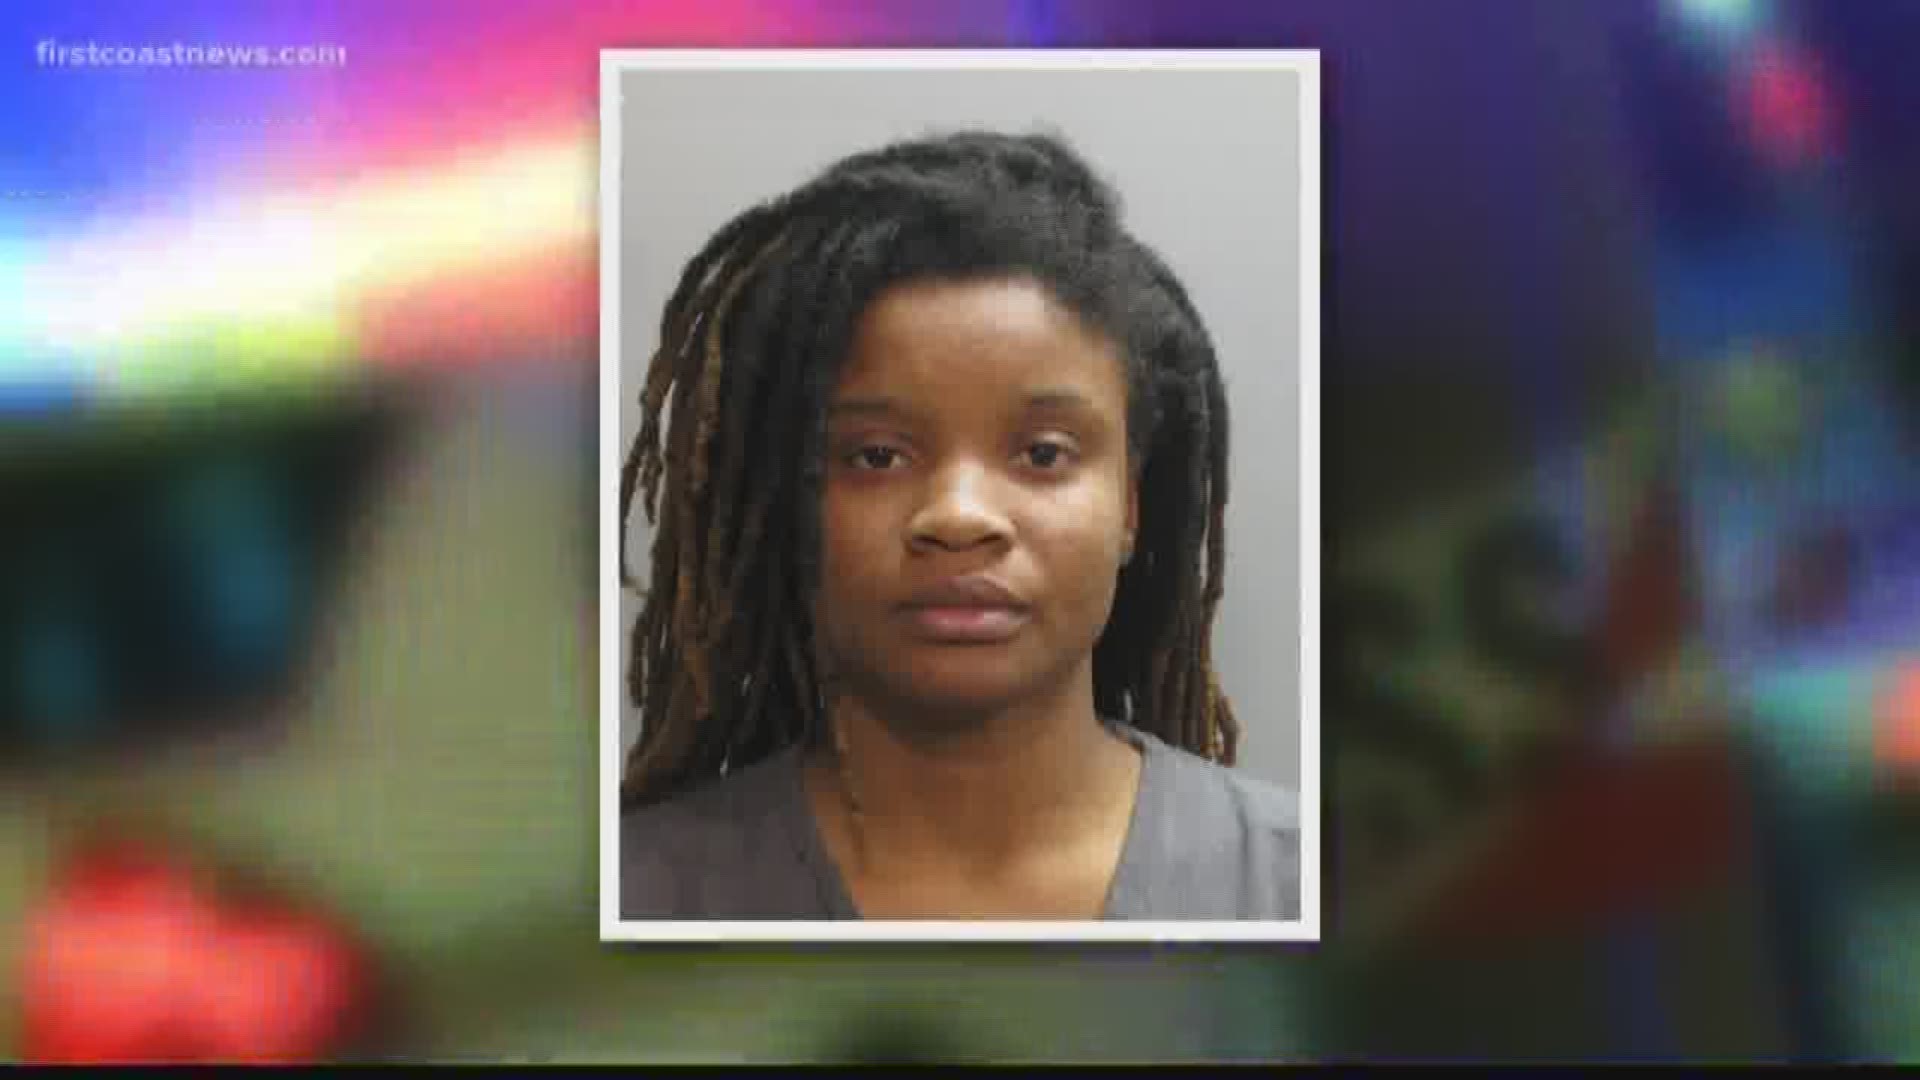 Back in January 2018, Sahara Barkley was gunned down after trying to stop Tairrah McGriff and another man from stealing her car.